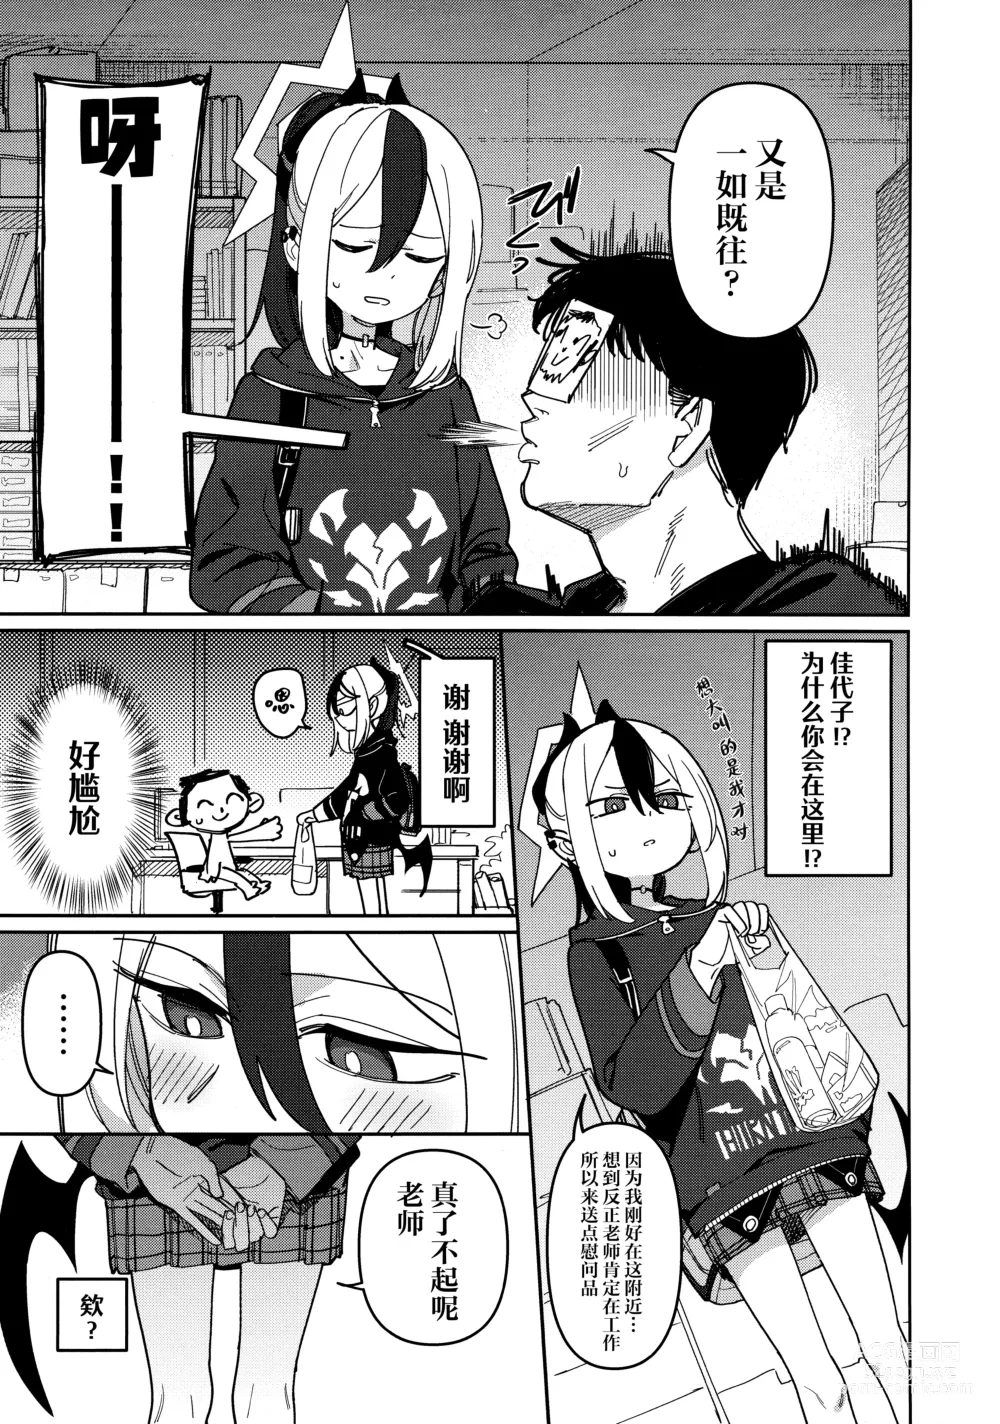 Page 5 of doujinshi 鬼方佳代子不会做这种事情 Part.2